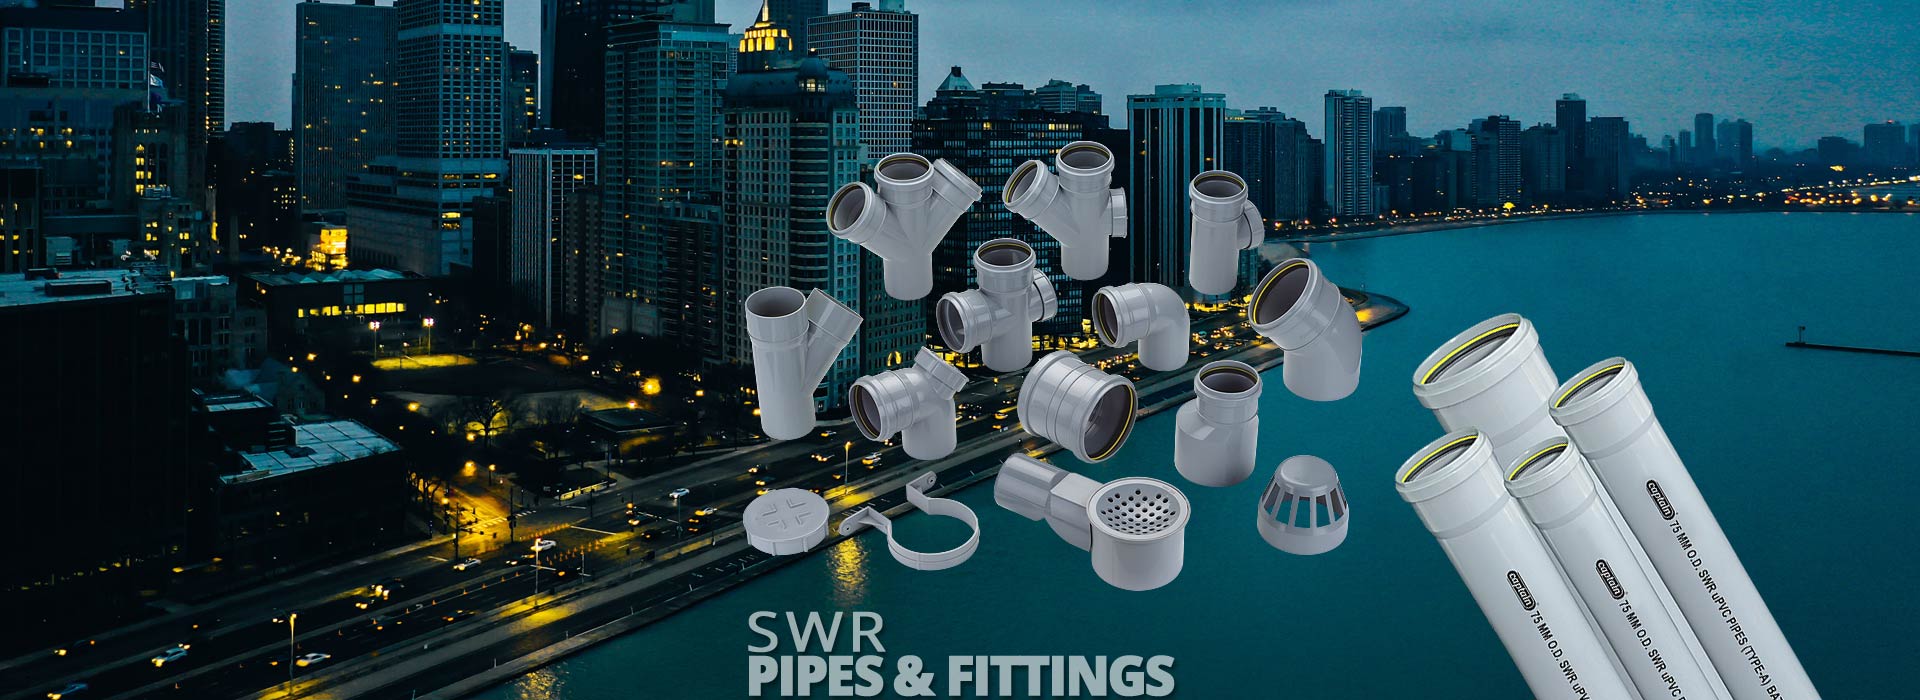 SWR Pipes & Fittings from Captain Pipes Ltd.